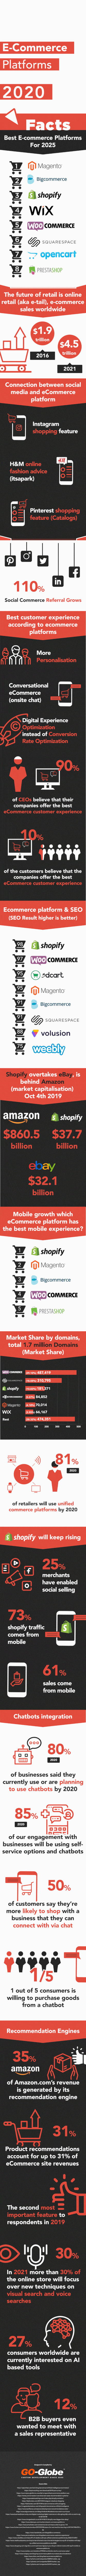 Top eCommerce platforms for 2020 [Infographic] Infographic